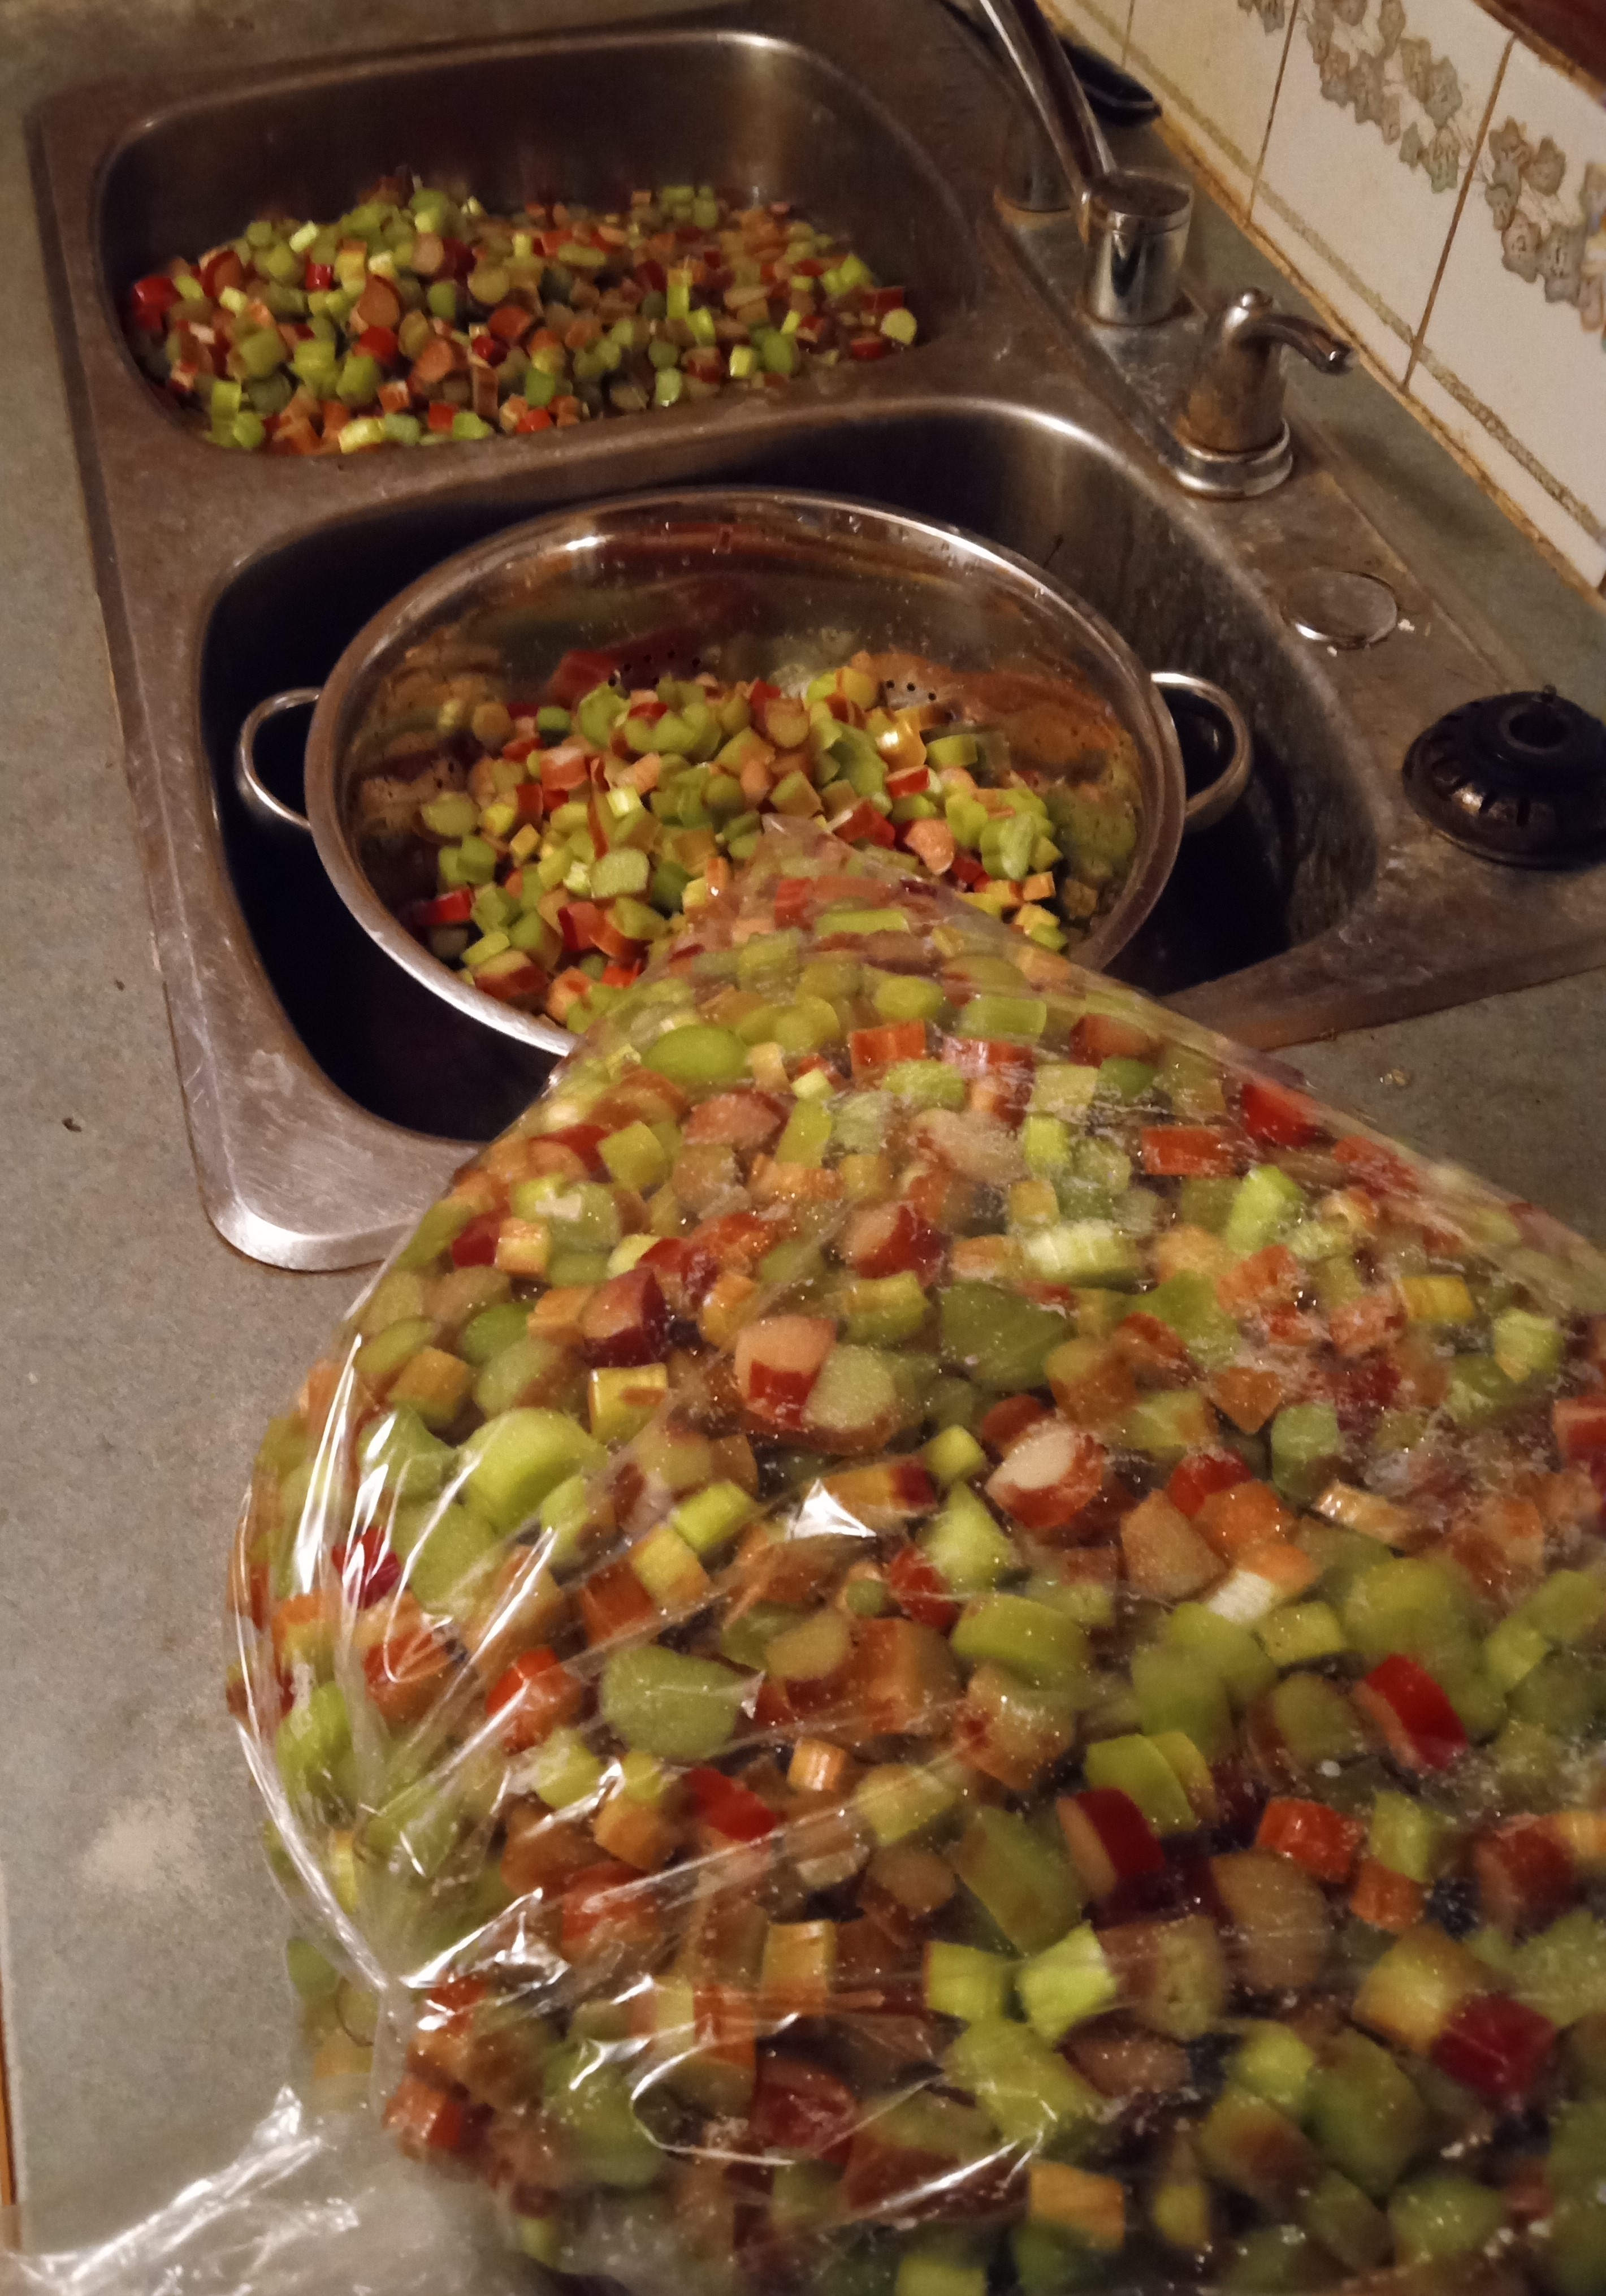 canning - preserving by freezing